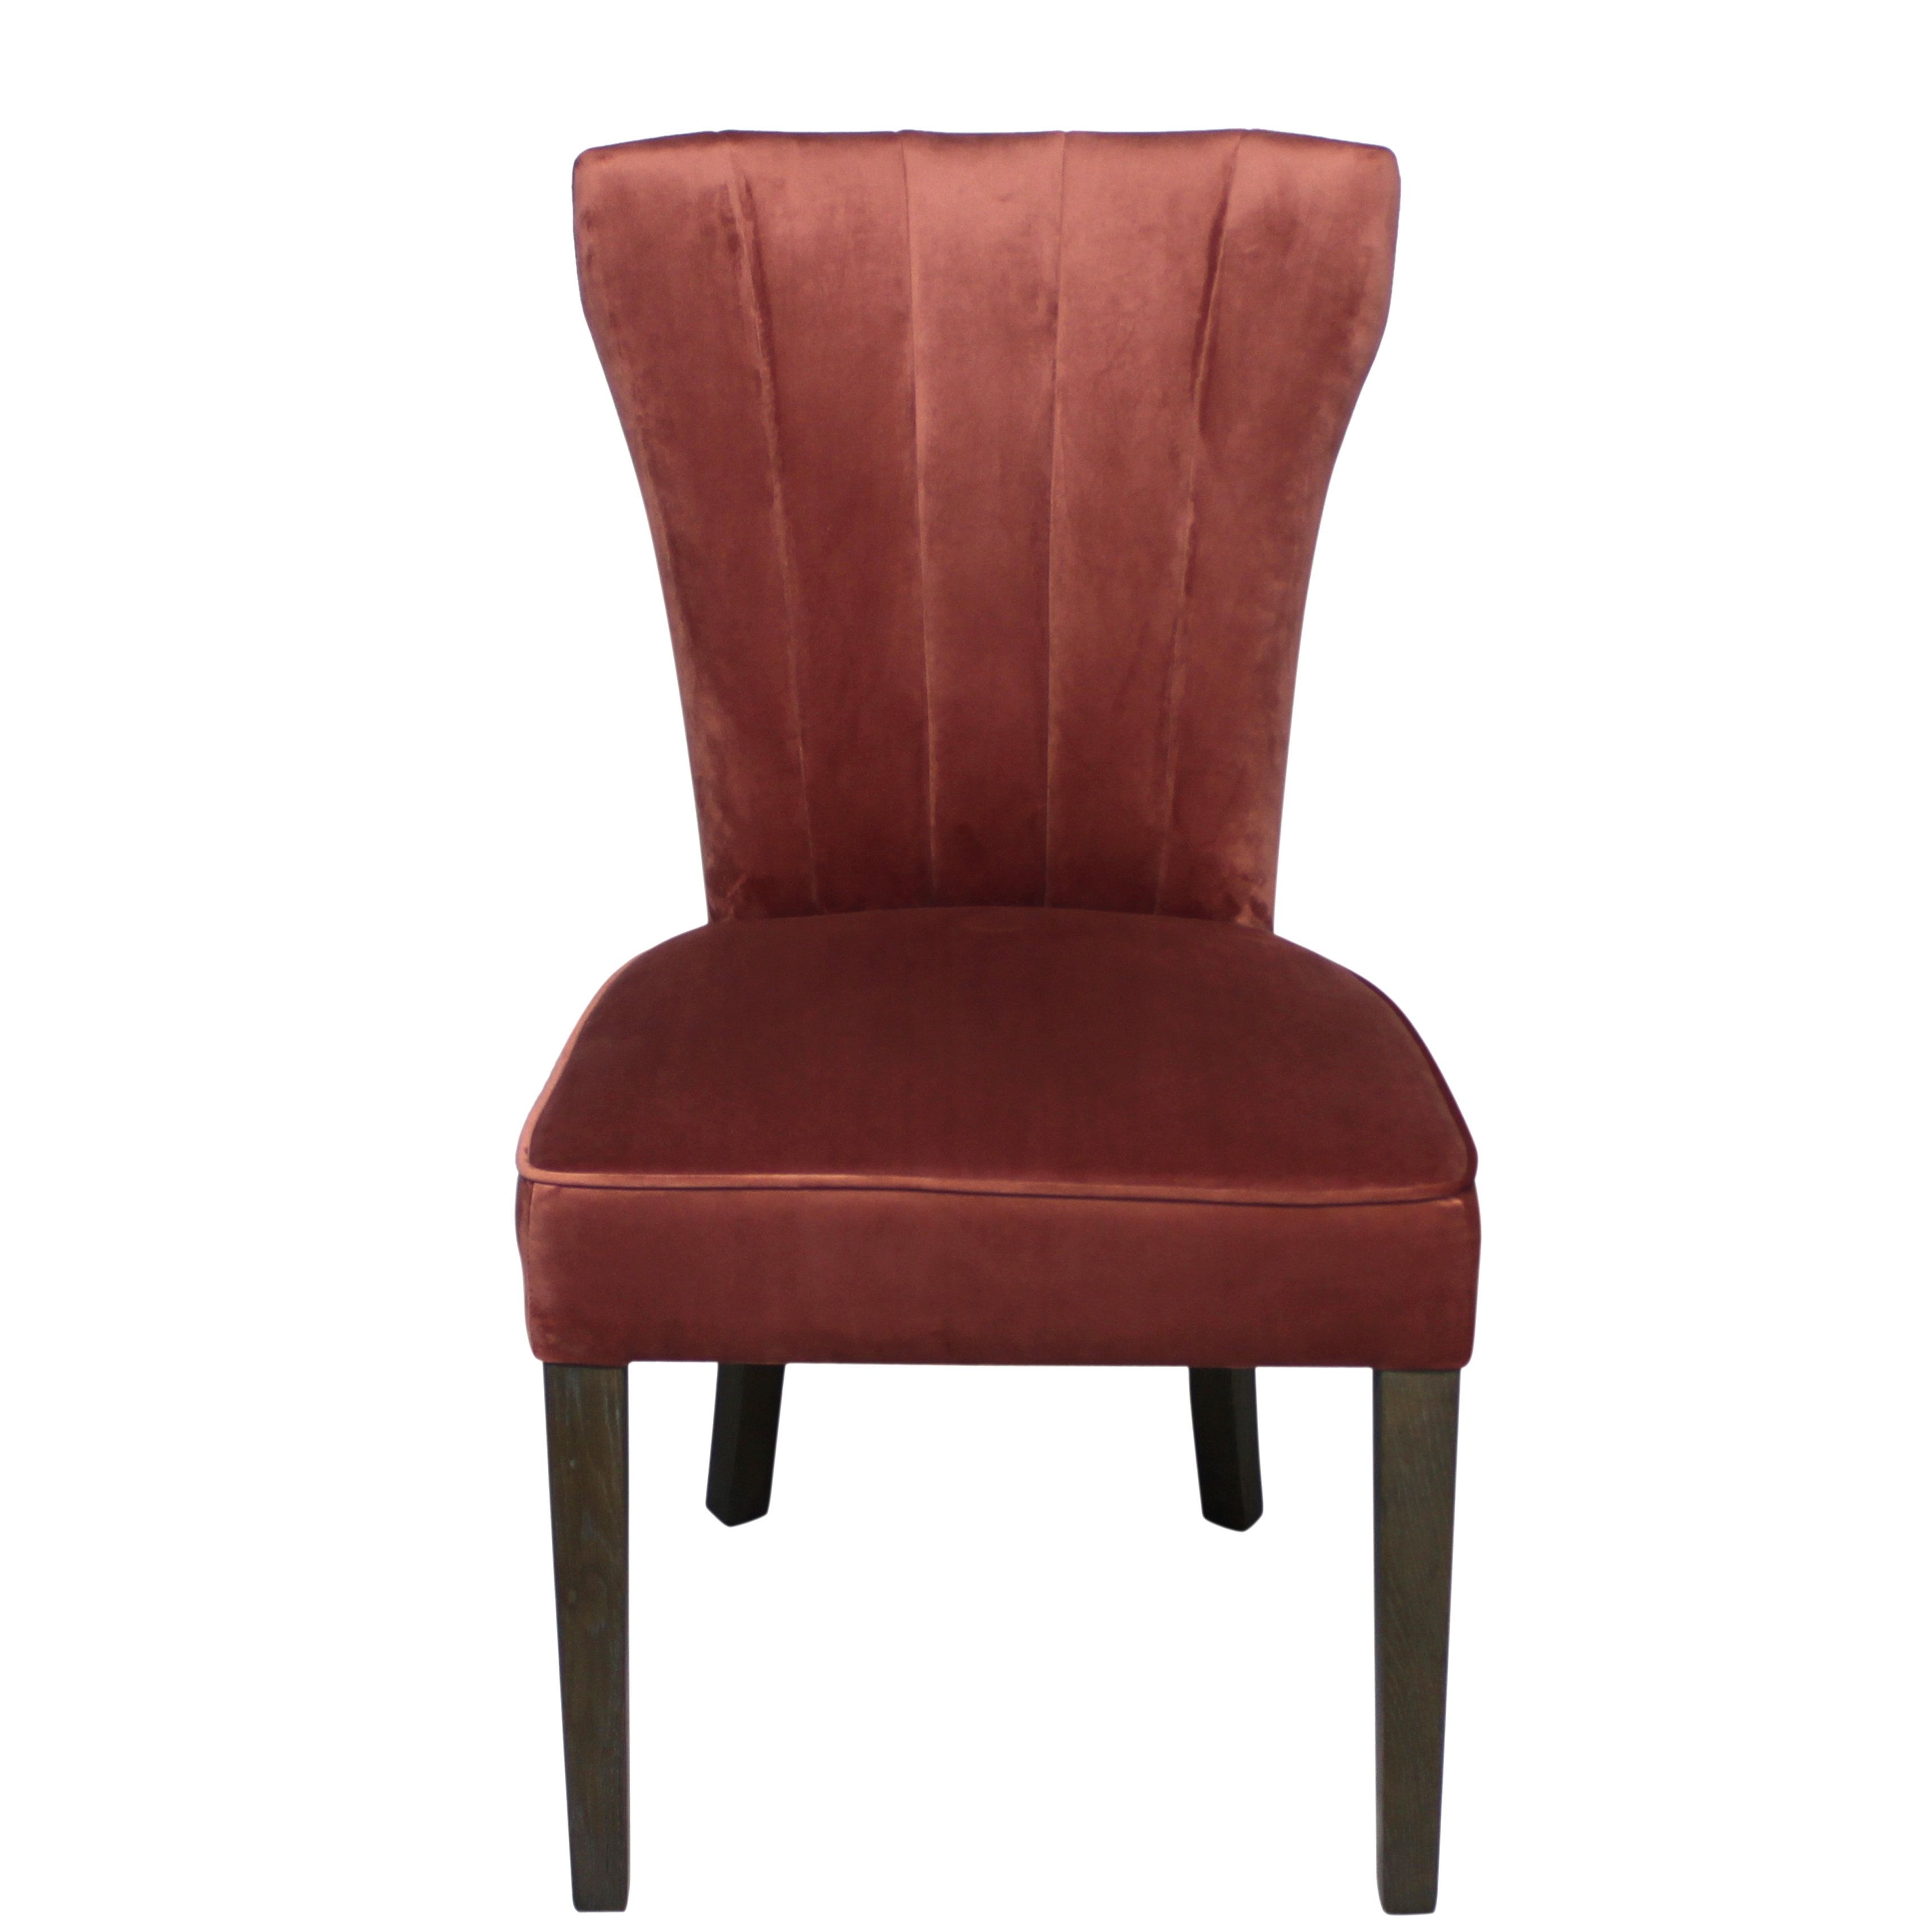 Wayfair Intended For Preferred Caden Upholstered Side Chairs (View 2 of 20)